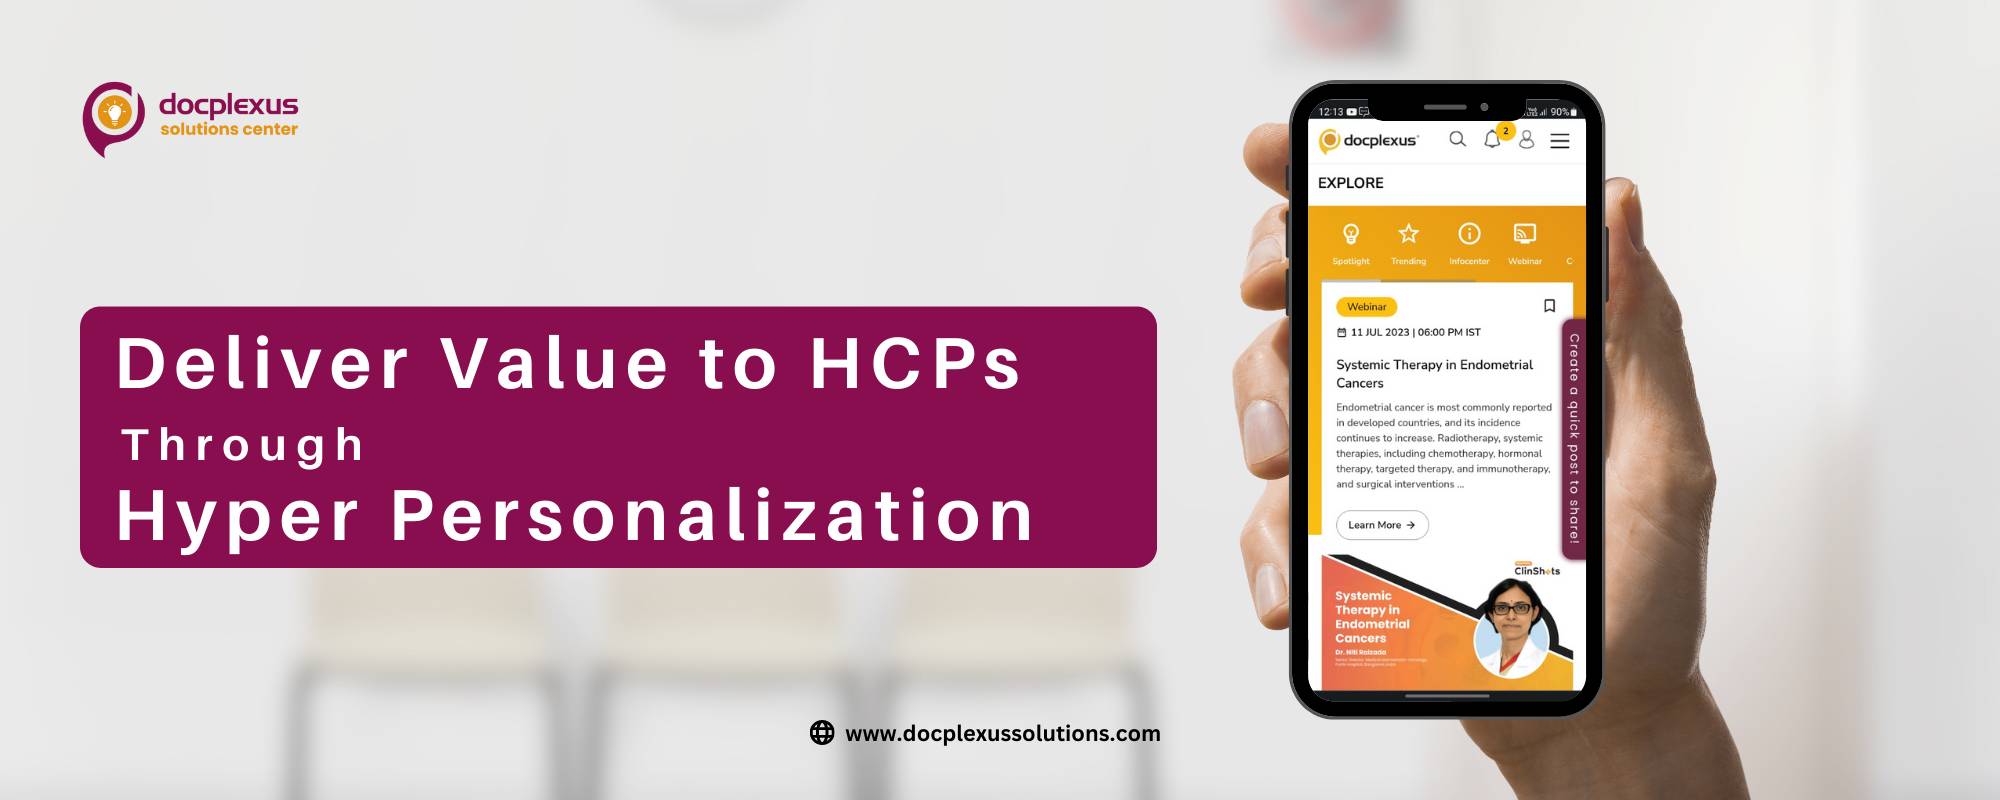 Hyper Personalization for HCPs